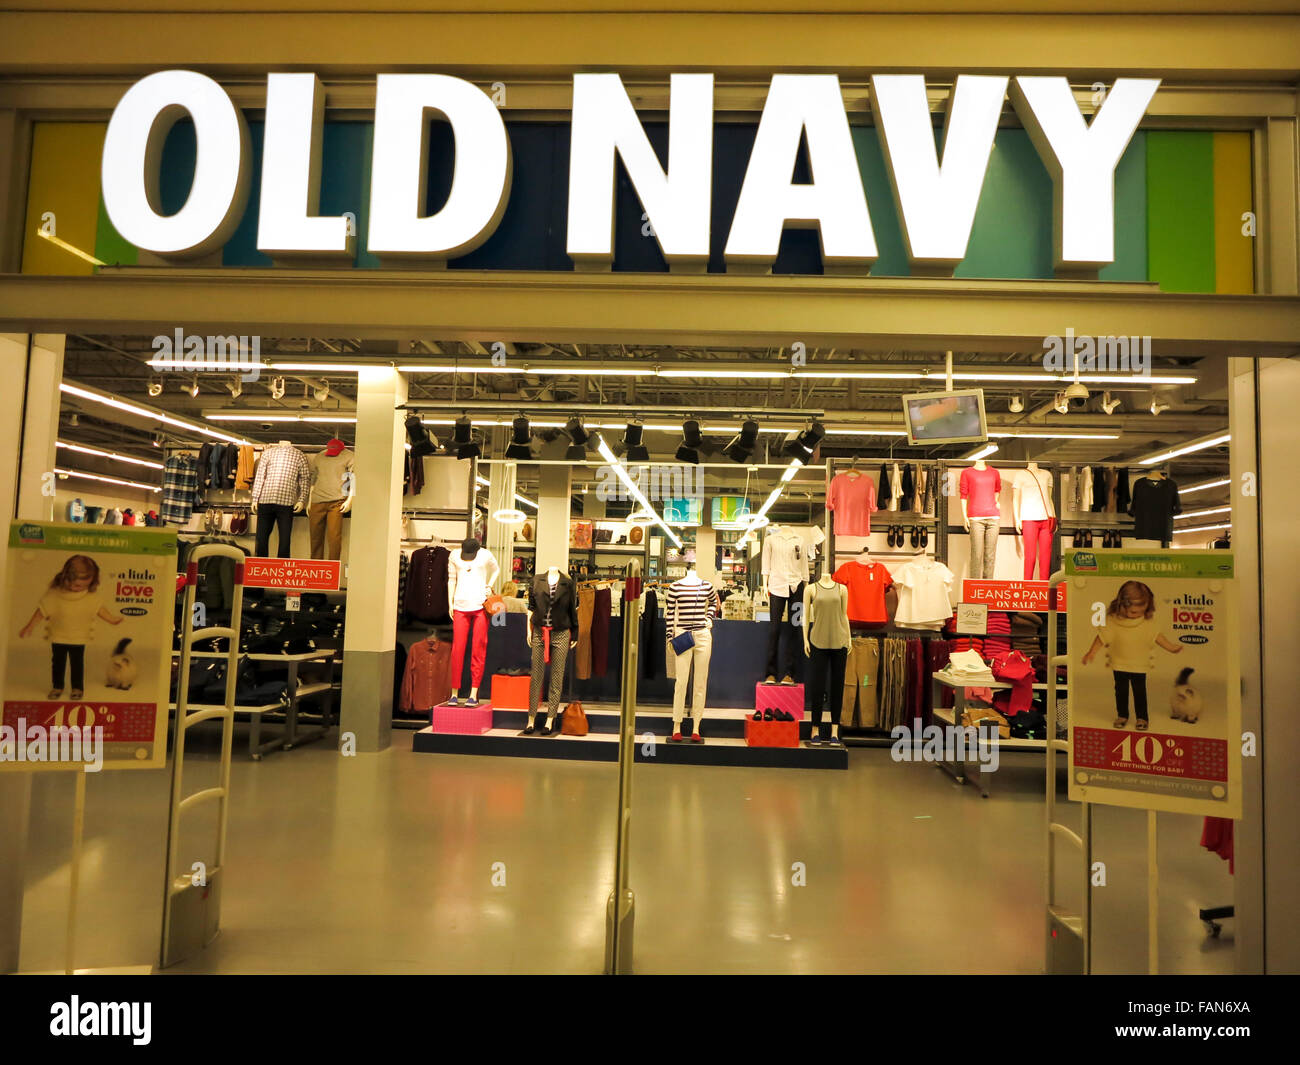 ALBERTA, CANADA - SEPTEMBER 23, 2014: Old Navy clothing store in Alberta, Canada. Old Navy is a popular clothing and accessories Stock Photo